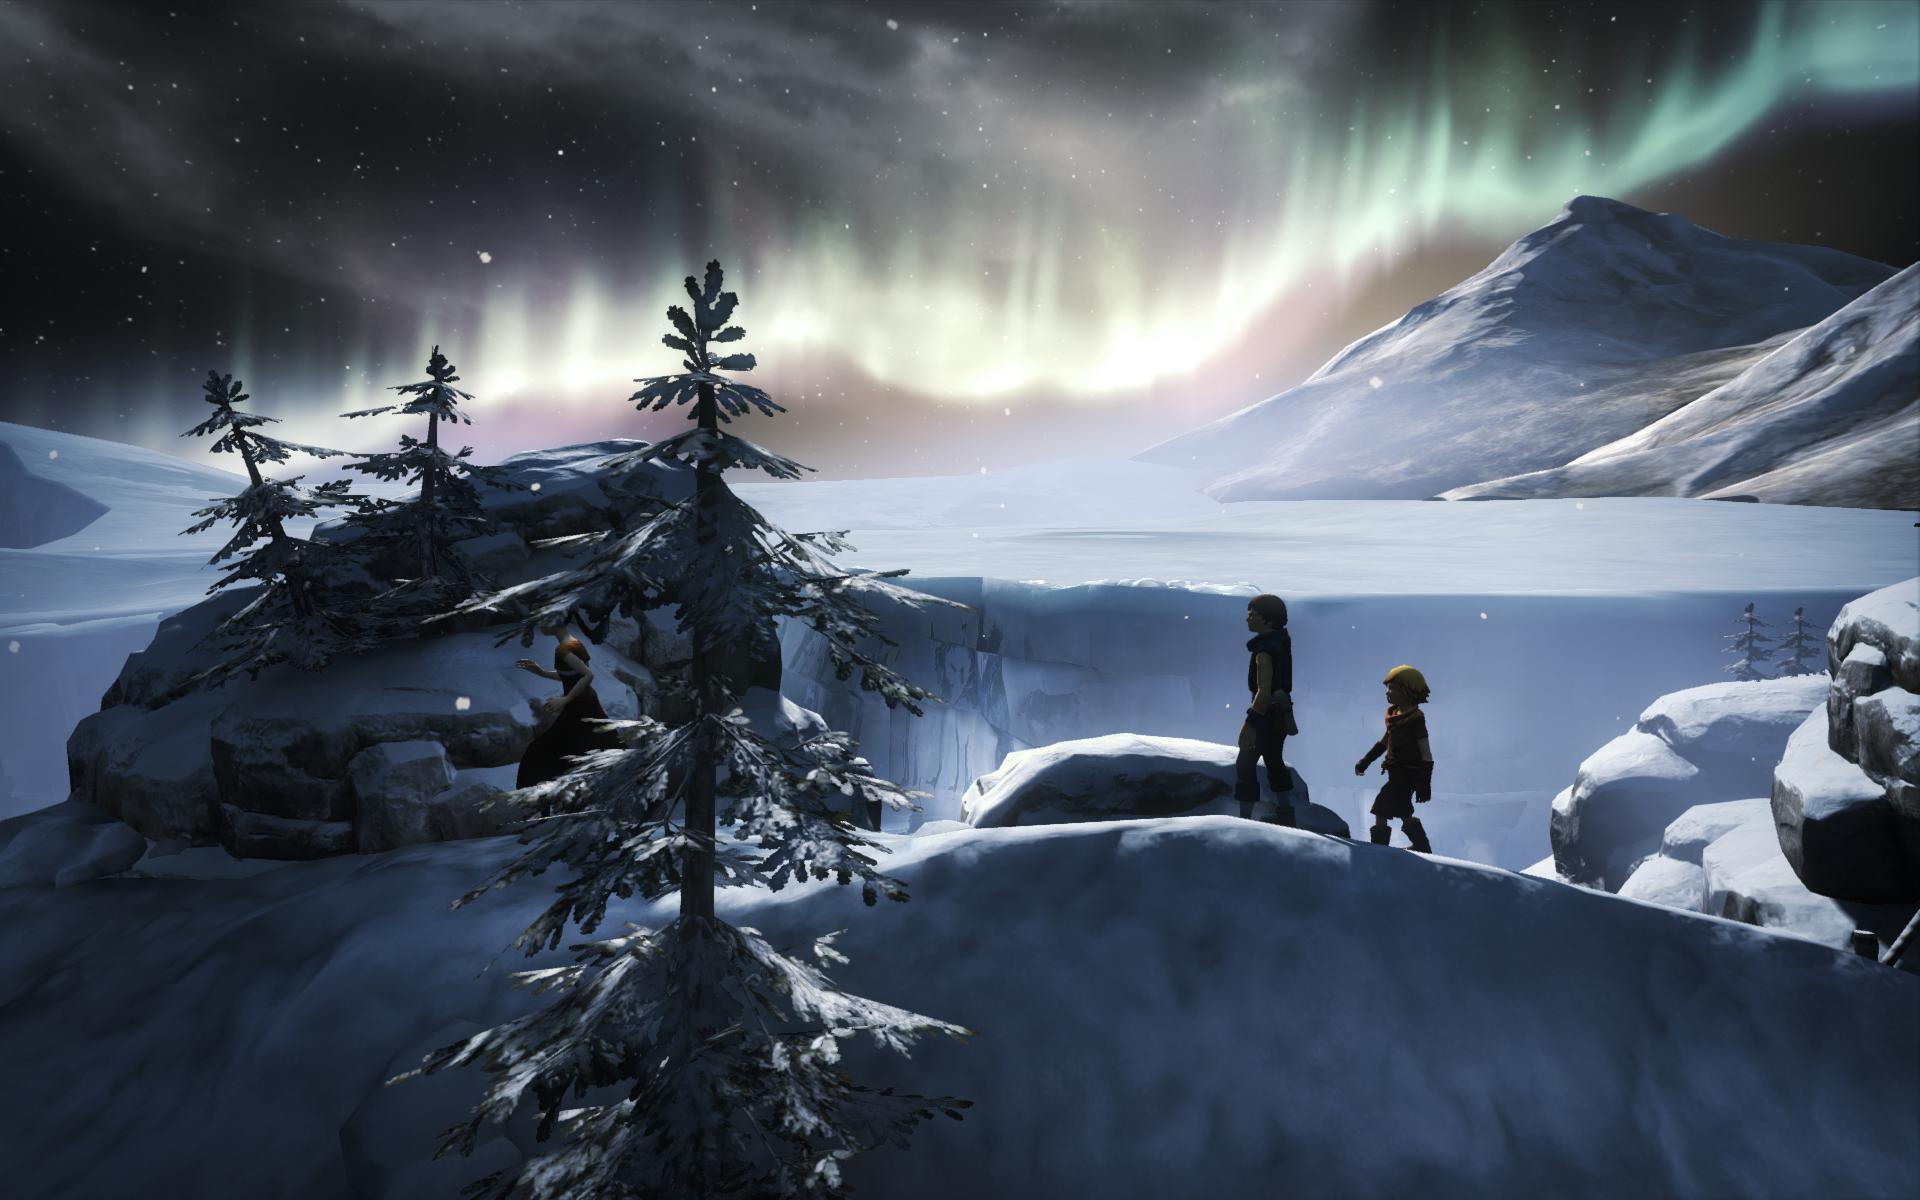 brothers a tale of two sons metacritic download free